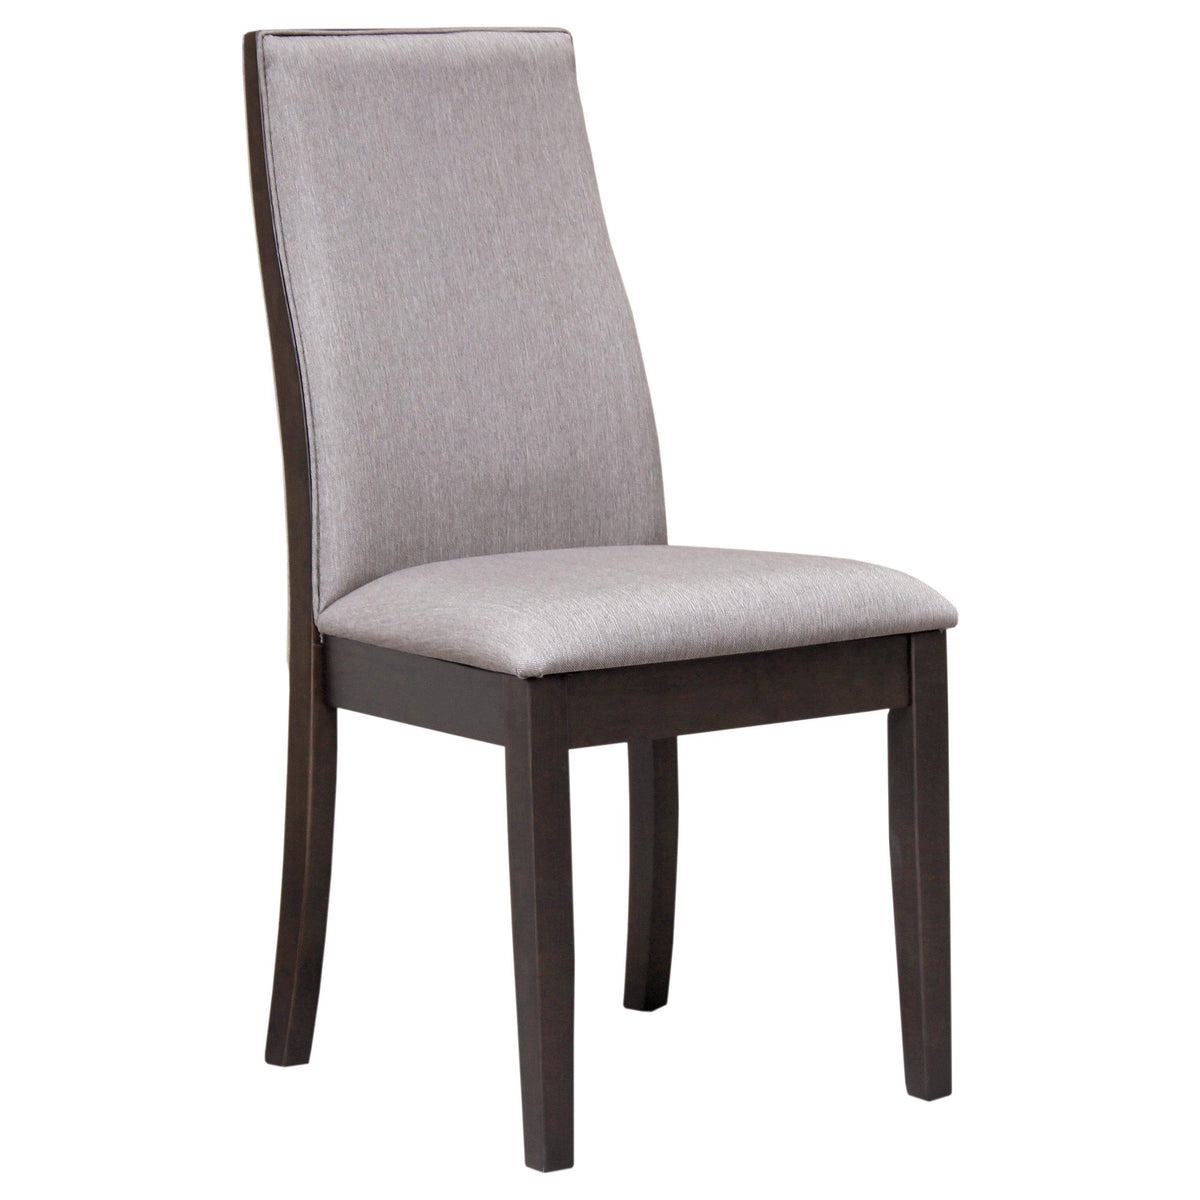 Spring Creek Upholstered Side Chairs Taupe (Set of 2)  Half Price Furniture